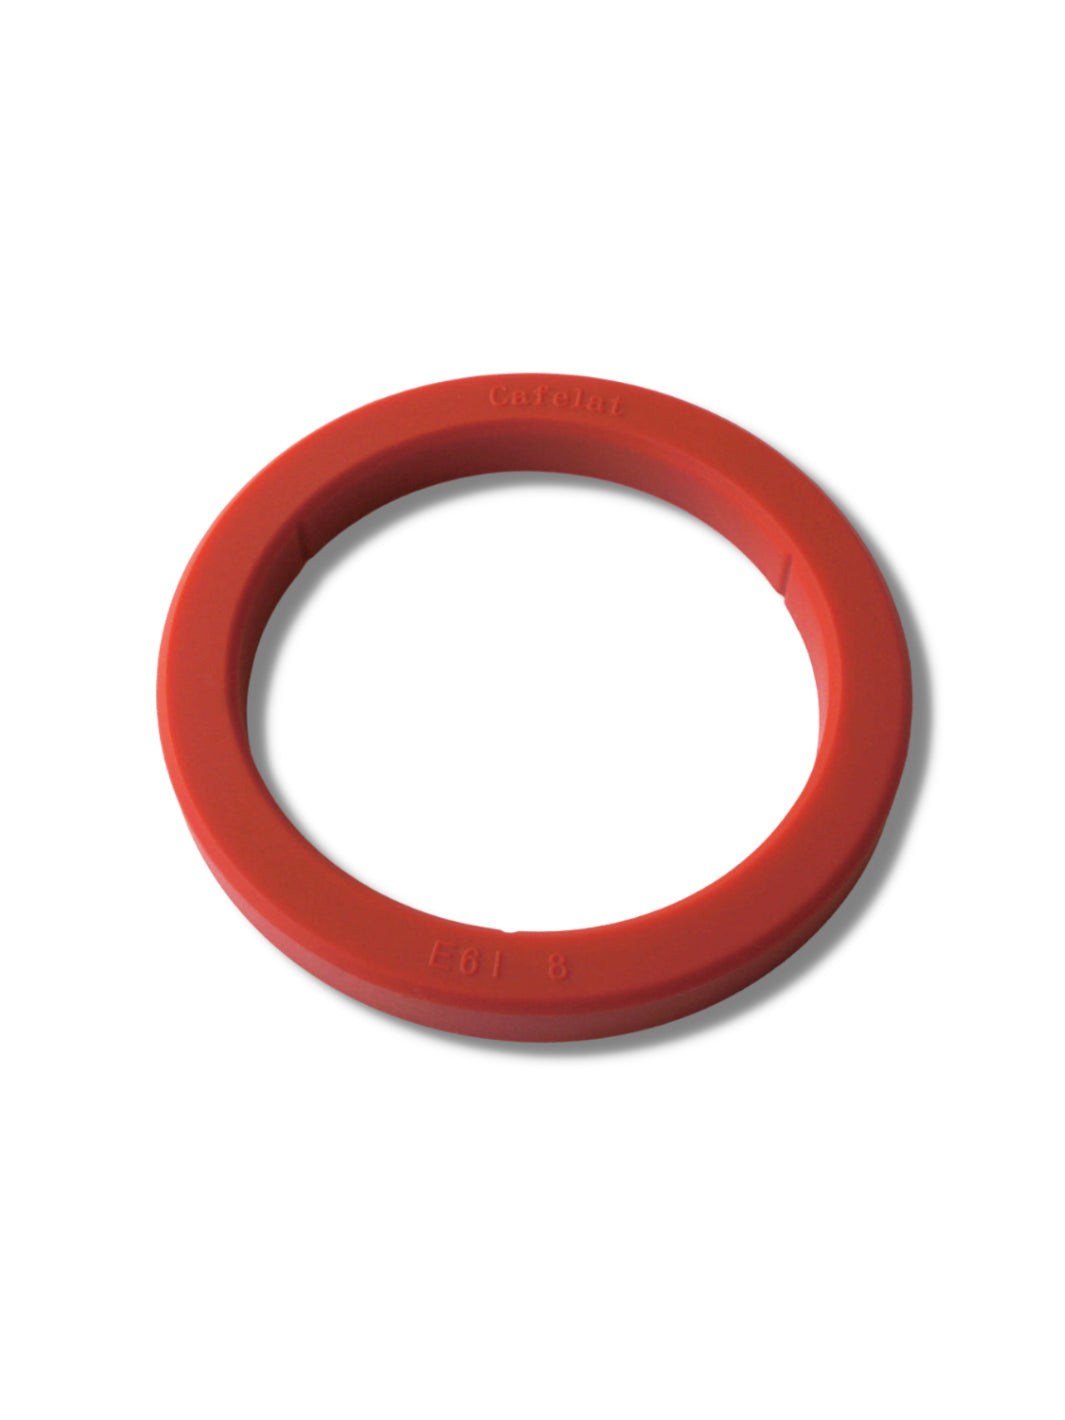 CAFELAT Silicone E61 Group Gasket (8.0mm)